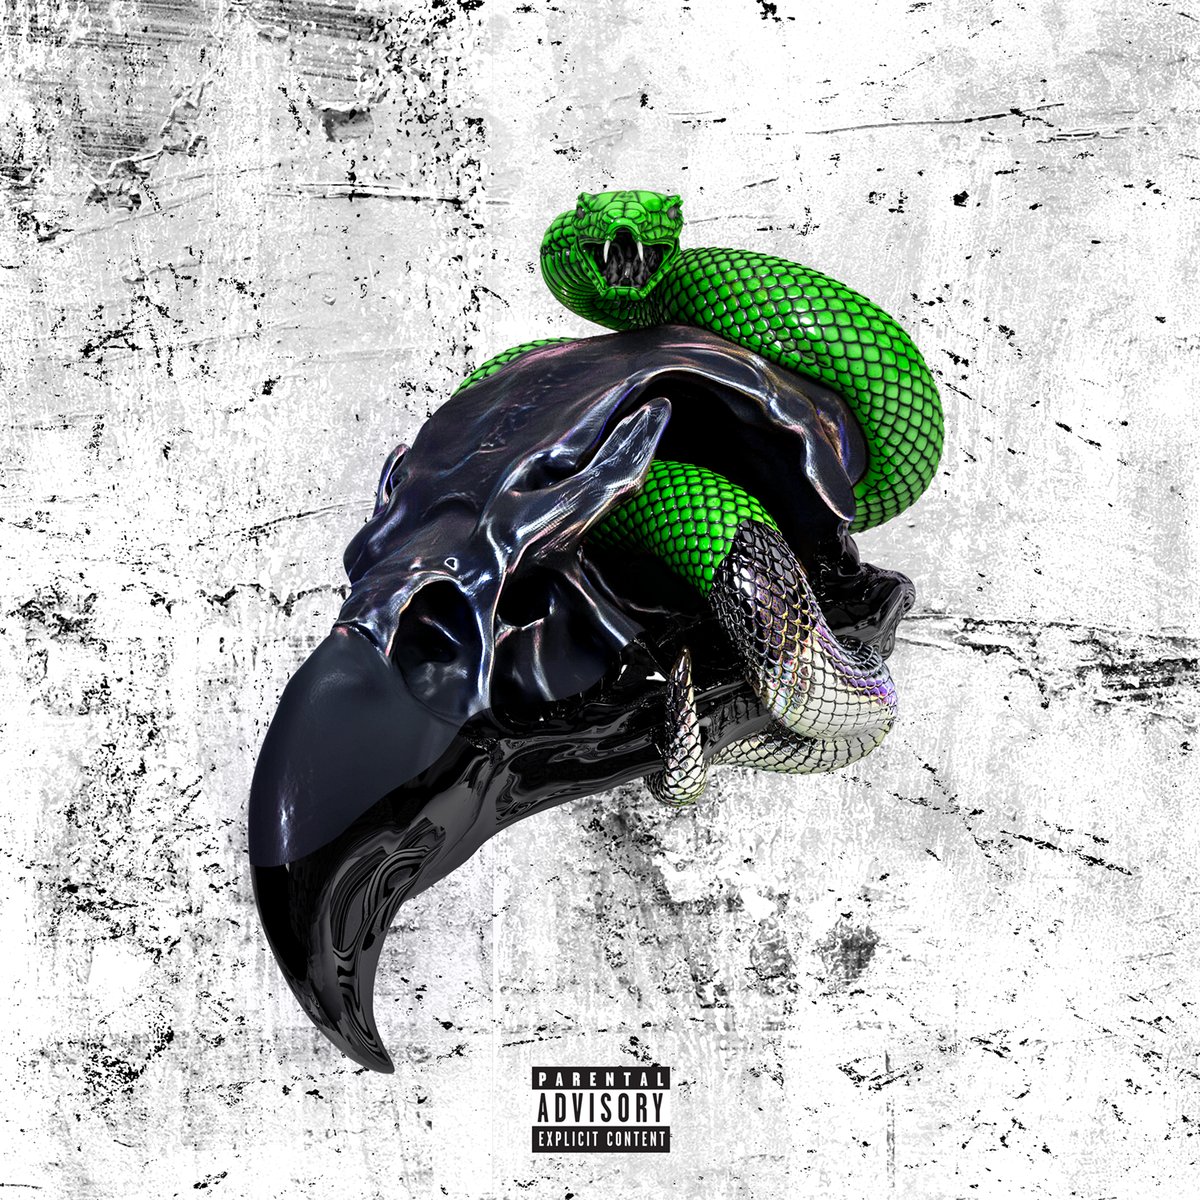 Cruise into the weekend with this #SUPERSLIMEY surprise drop from @1future and @youngthug —> goo.gl/ujdFTa